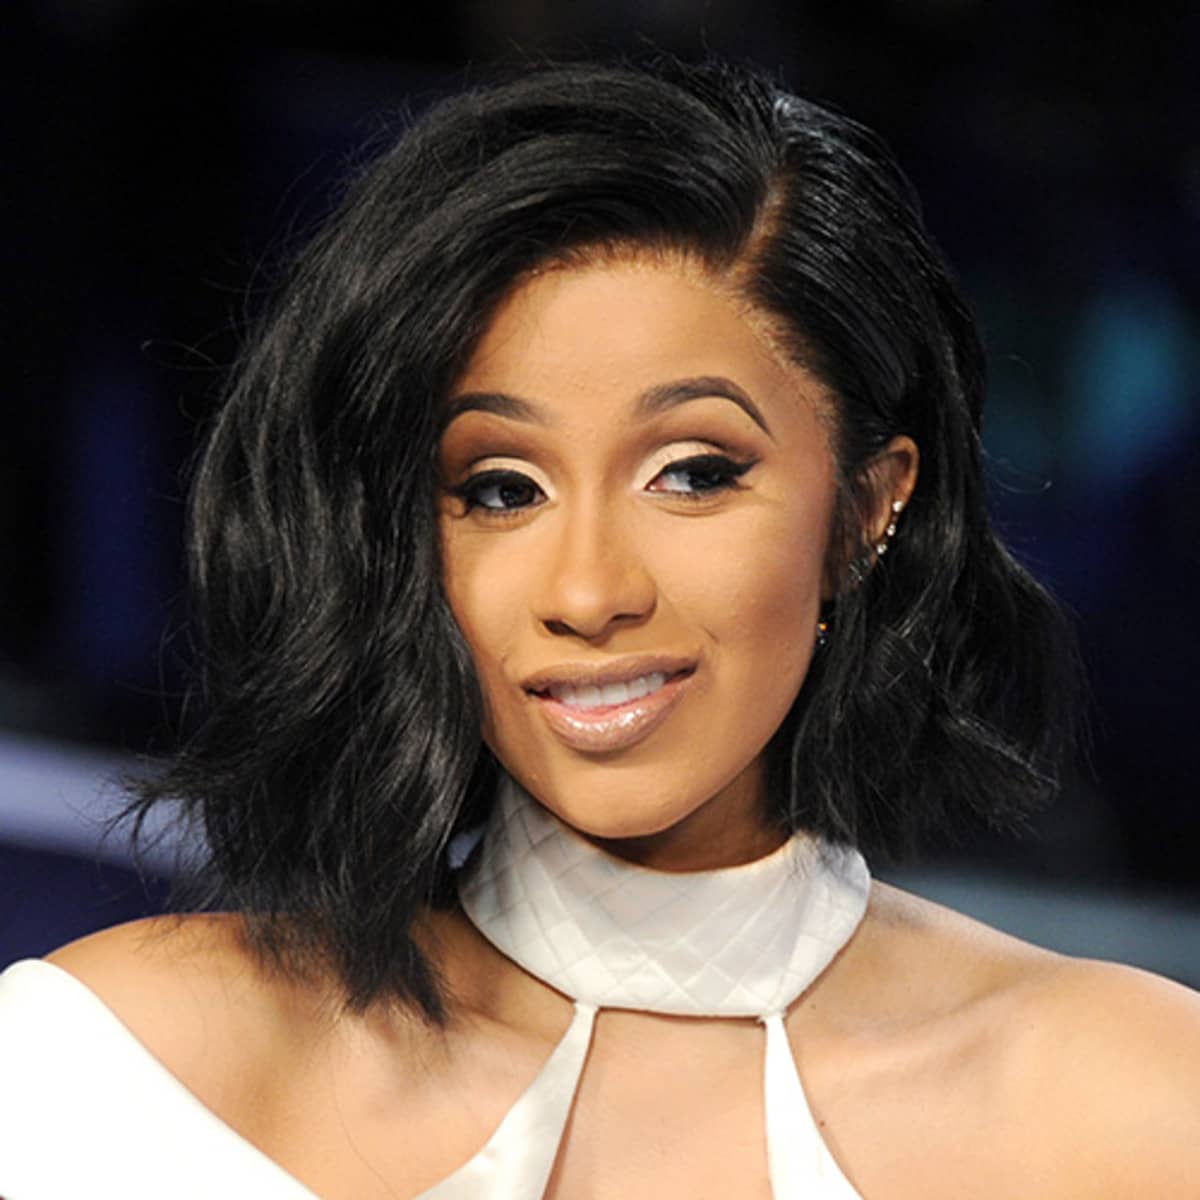 cardi-b-arrives-at-the-2017-mtv-video-music-awards-at-the-forum-on-august-27-2017-in-inglewood-california-photo-by-gregg-deguire_getty-images-500-2